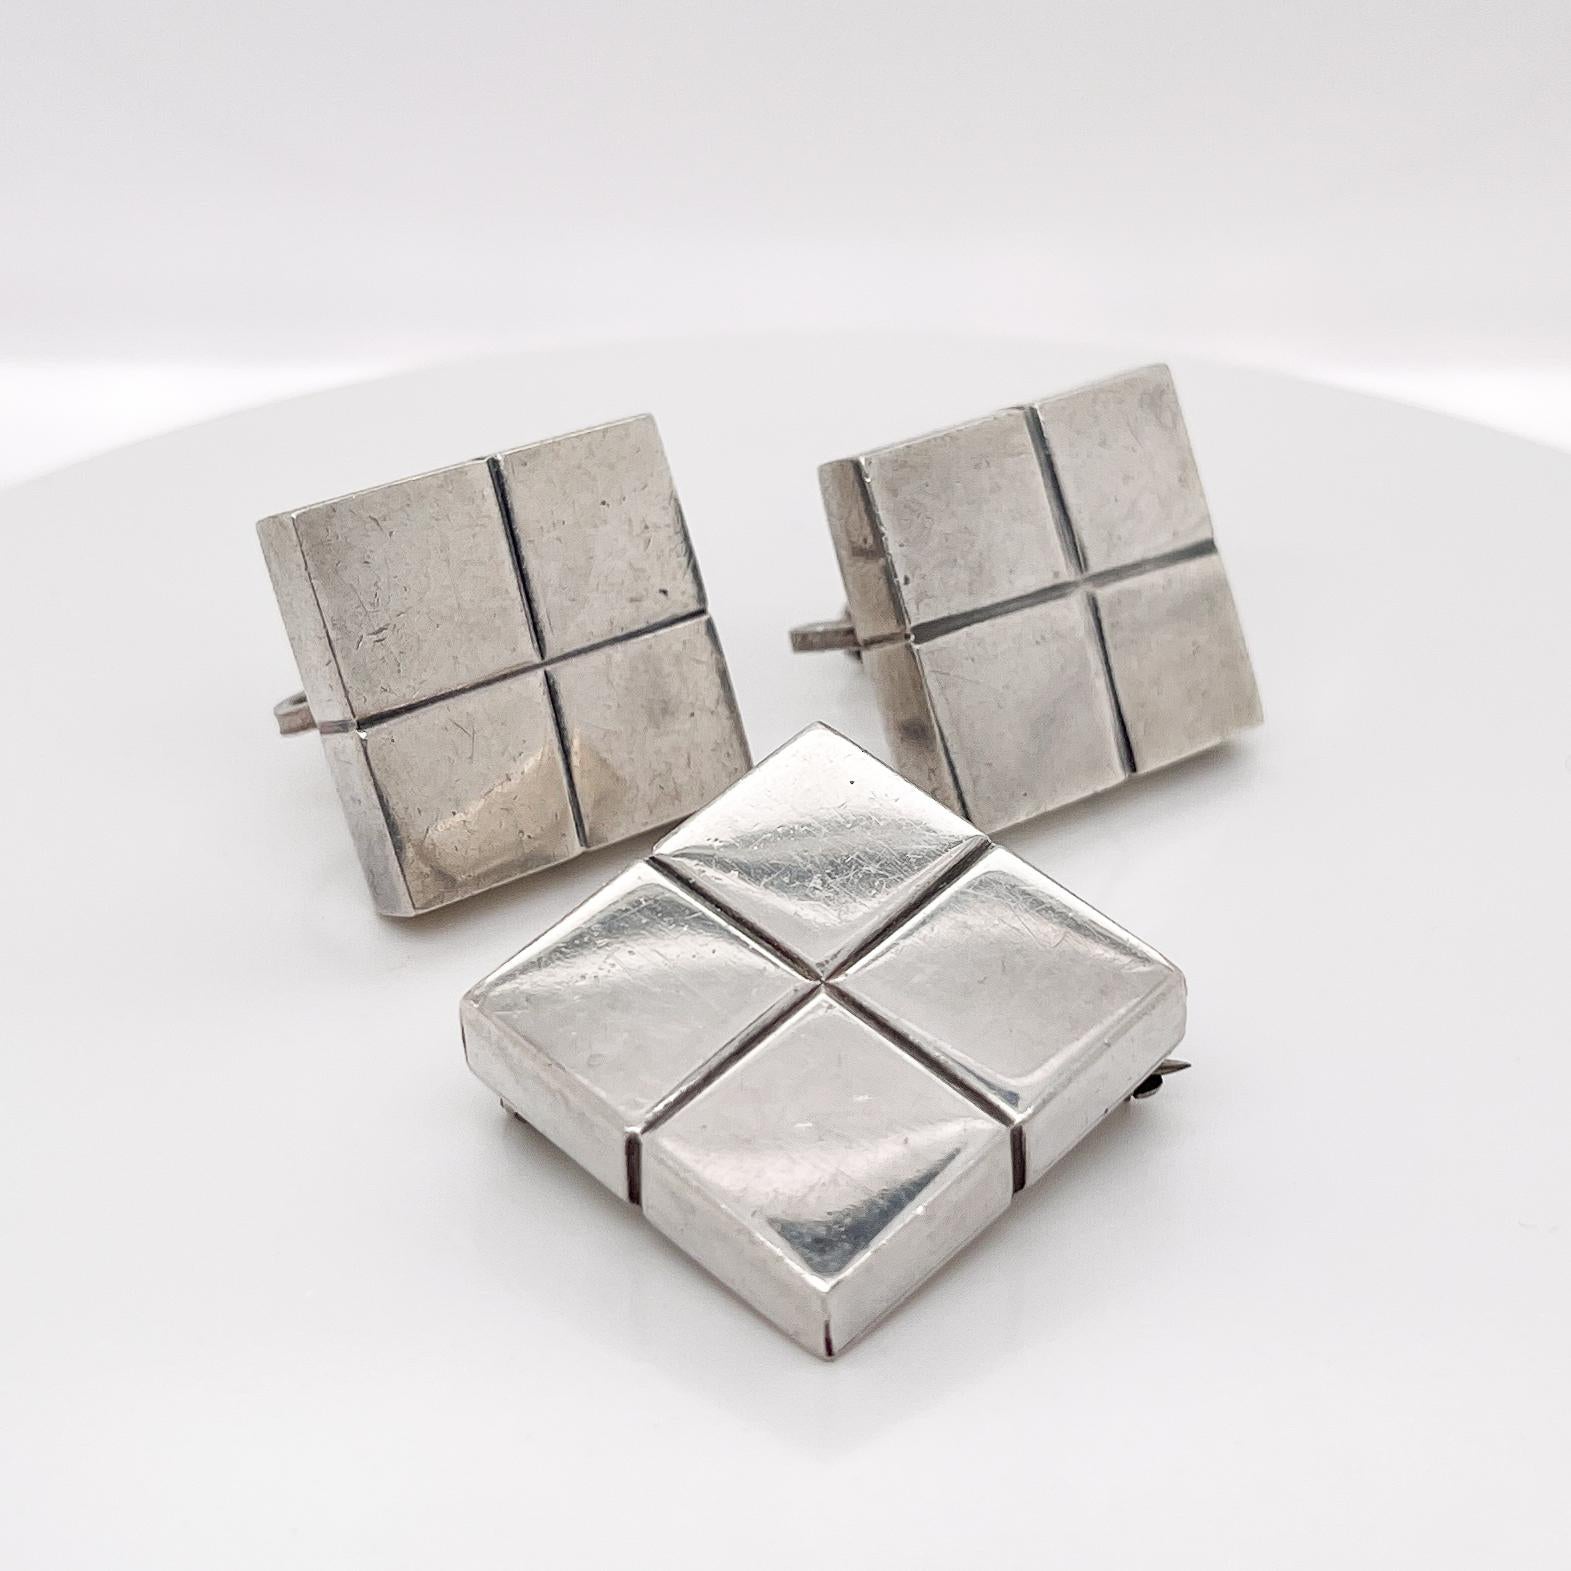 A very fine, three-piece Mexican silver modernist square cube clip-on earrings  and brooch.

By William Spratling. 

With cube-shaped screw back earrings with screwbacks and a conformning cube-shaped brooch.   

Simply a terrific parure from on of